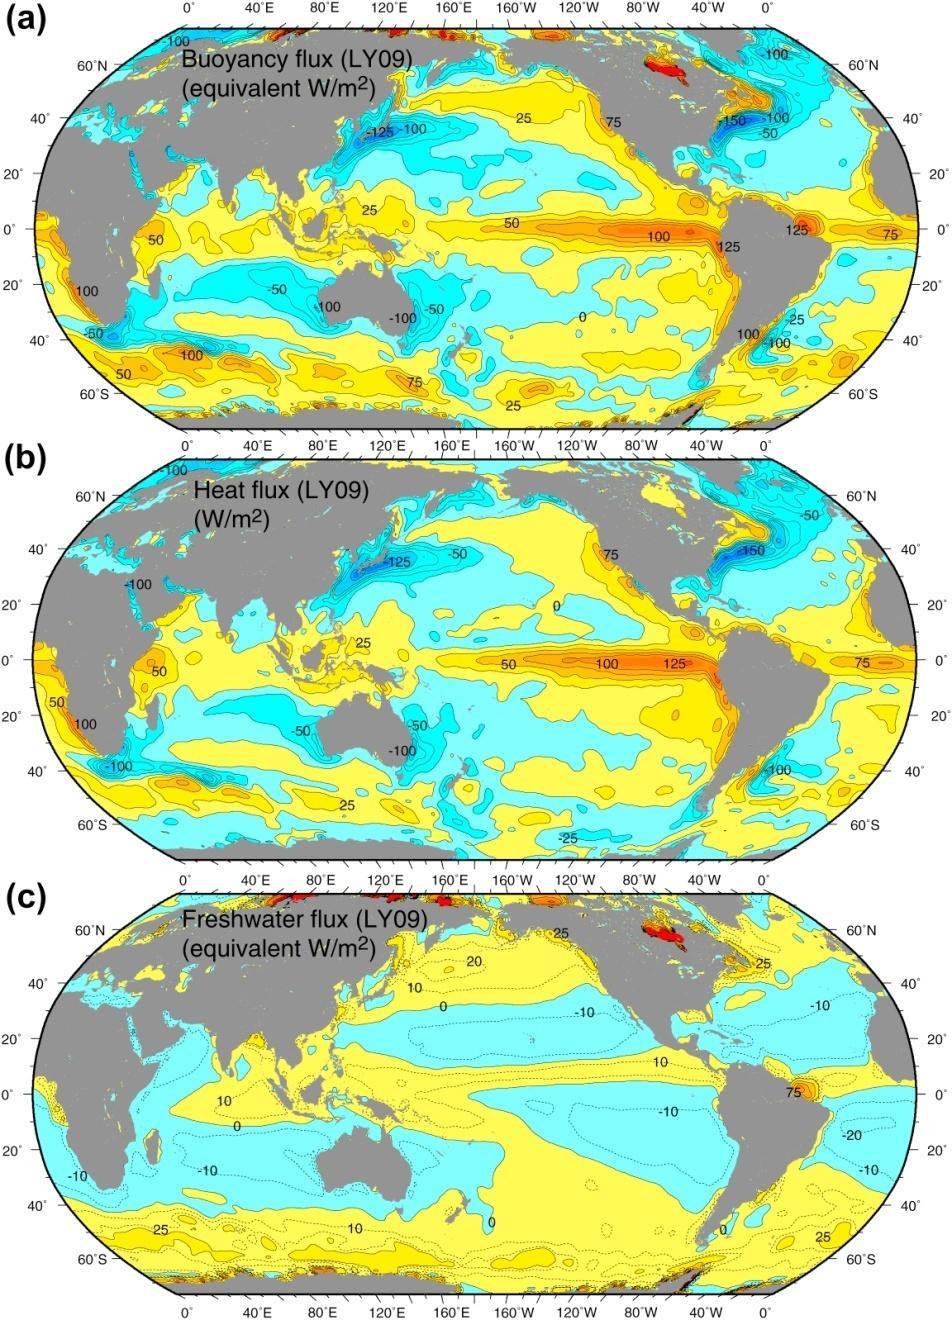 c) Is often associated with large eddies/filaments of upwelled water that spread westward offshore d) Brings water from the abyssal ocean (>1000 m) to the sea surface 8) Subtropical gyres such as the